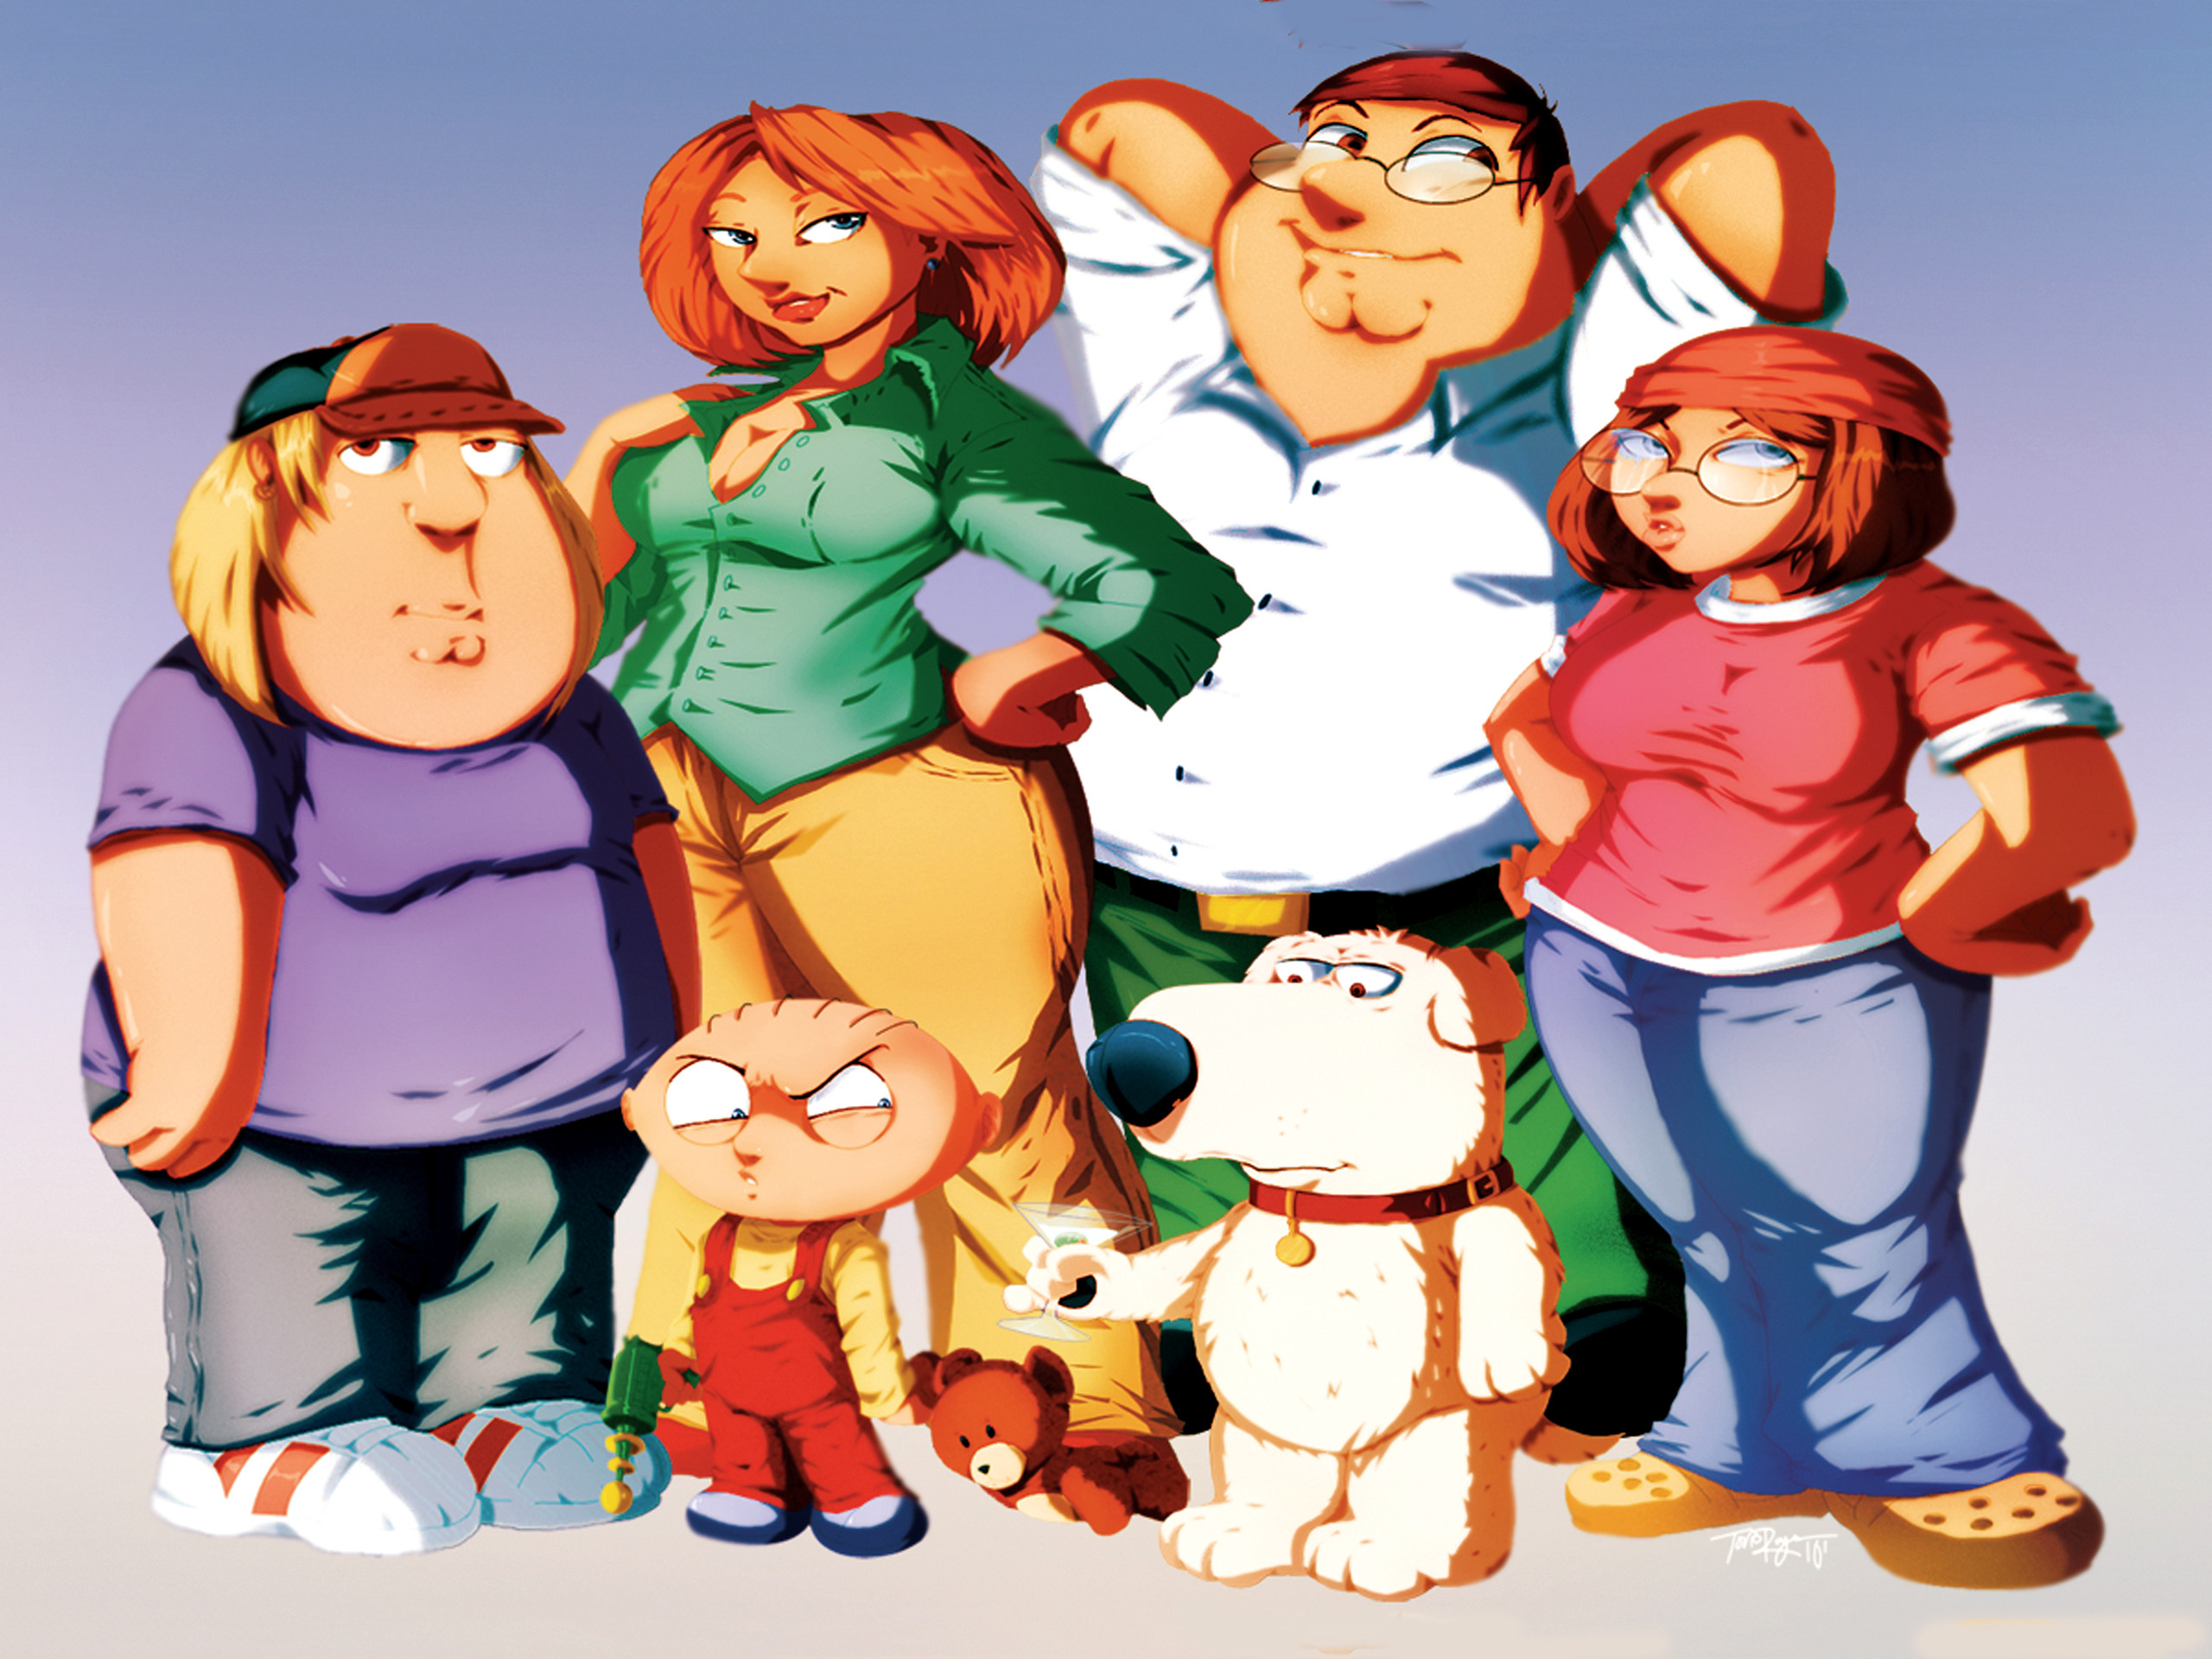 731998-cool-funny-family-guy-wallpapers-2560x1920-hd-1080p.jpg